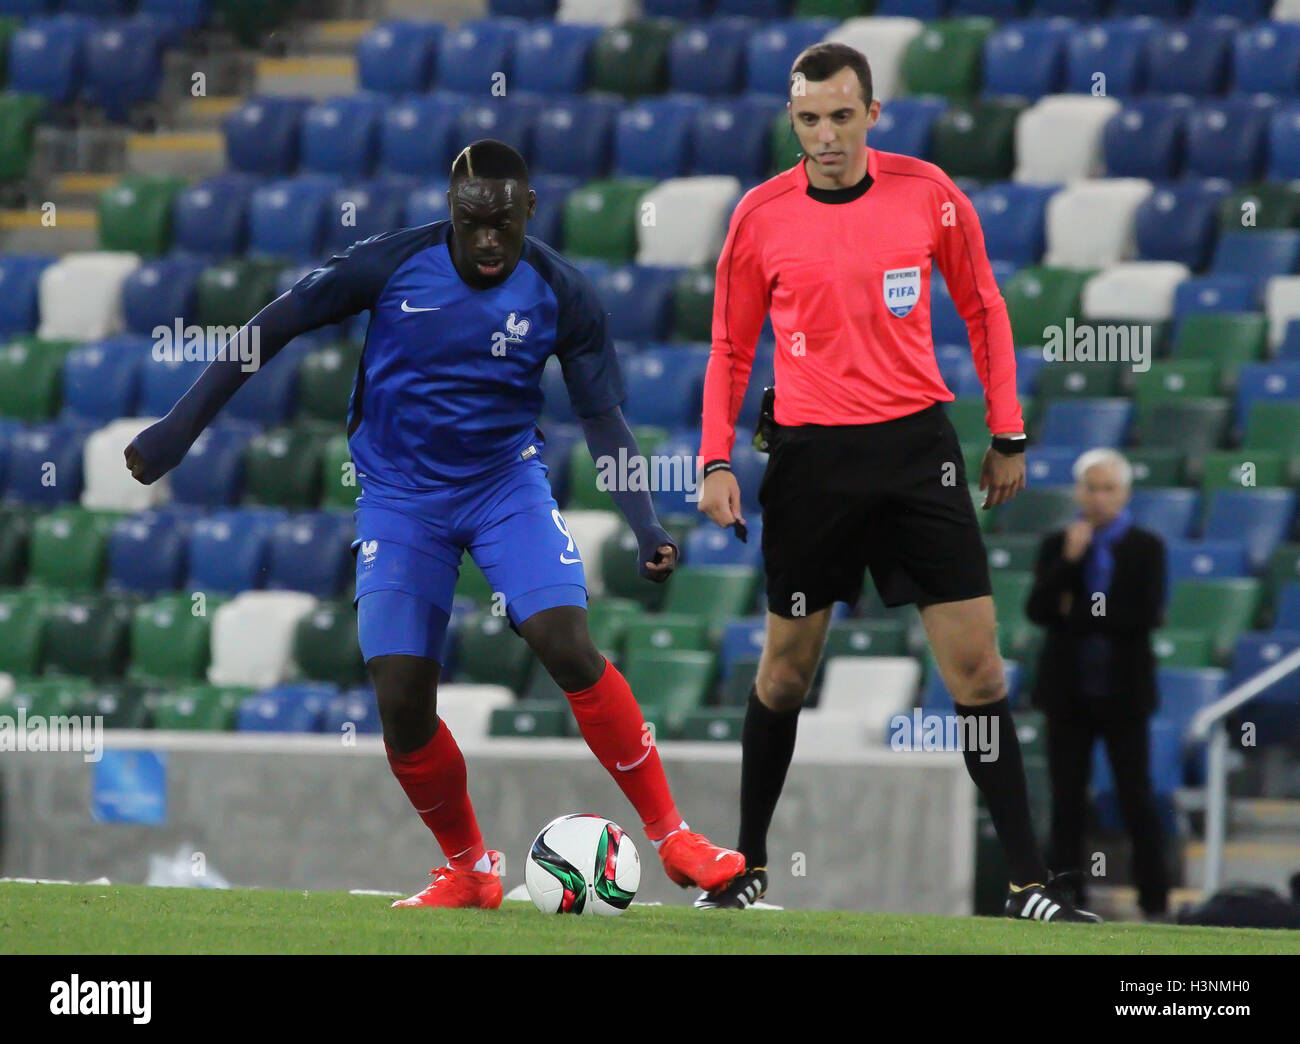 National Football Stadium at Windsor Park, Belfast, Northern Ireland, 11 Oct 2016. Jean-Kevin Augustin scored two goals in the 0-3 win in Belfast tonight. David Hunter/Alamy Live News. Stock Photo